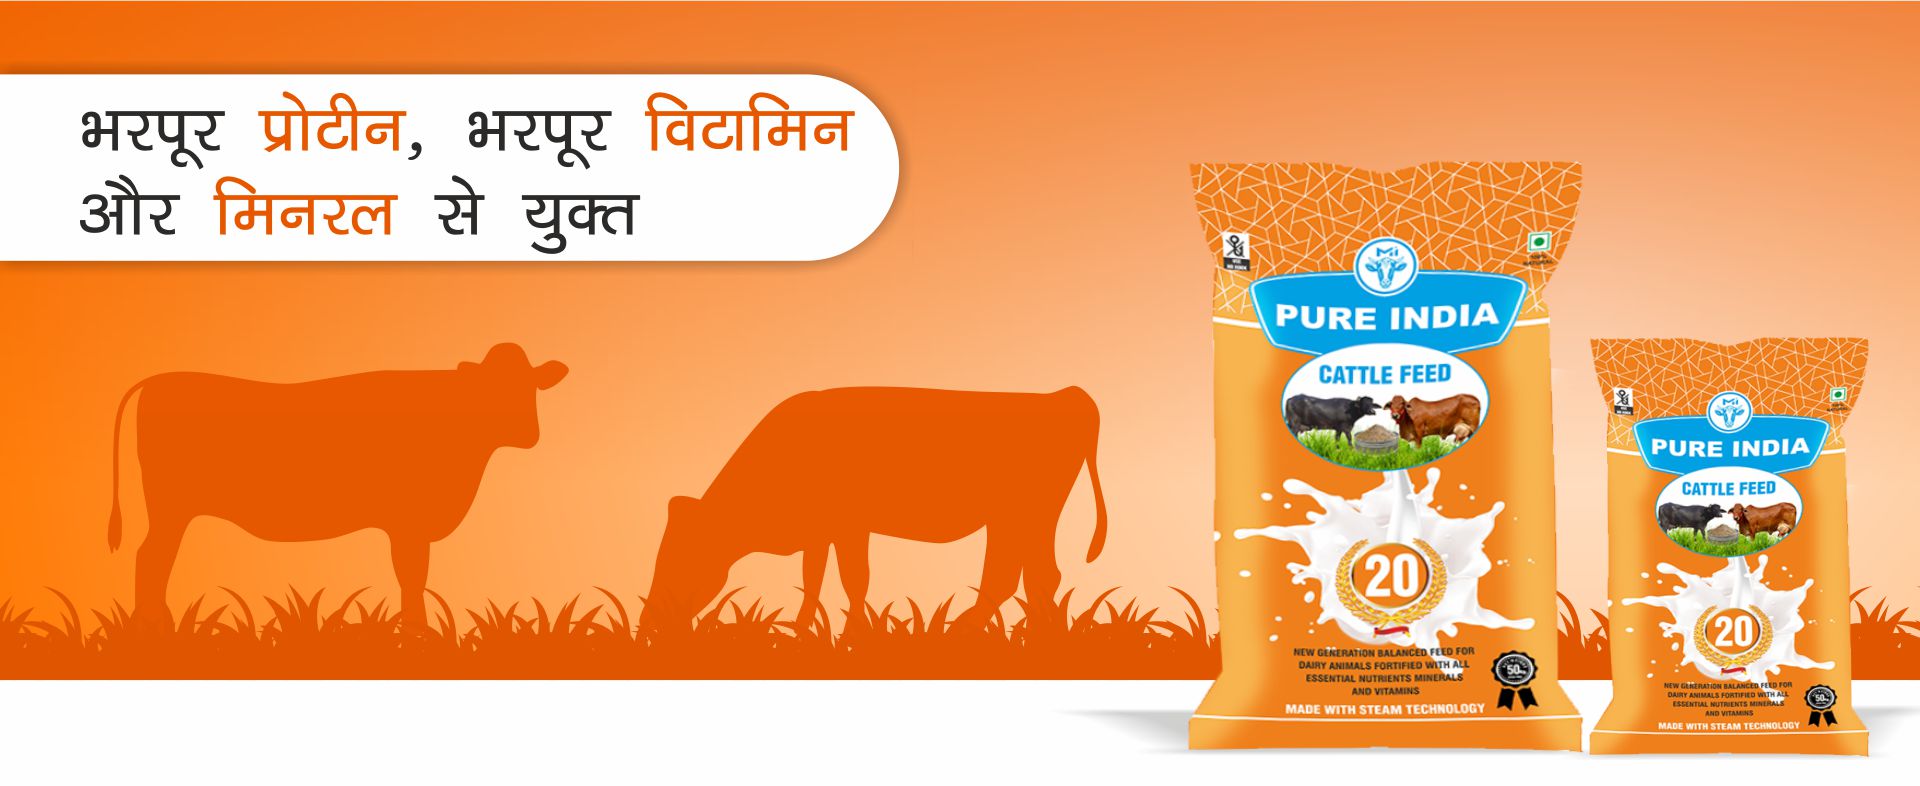 Cattle Feed Manufacturer in Kanpur | Himalaya Food Industries